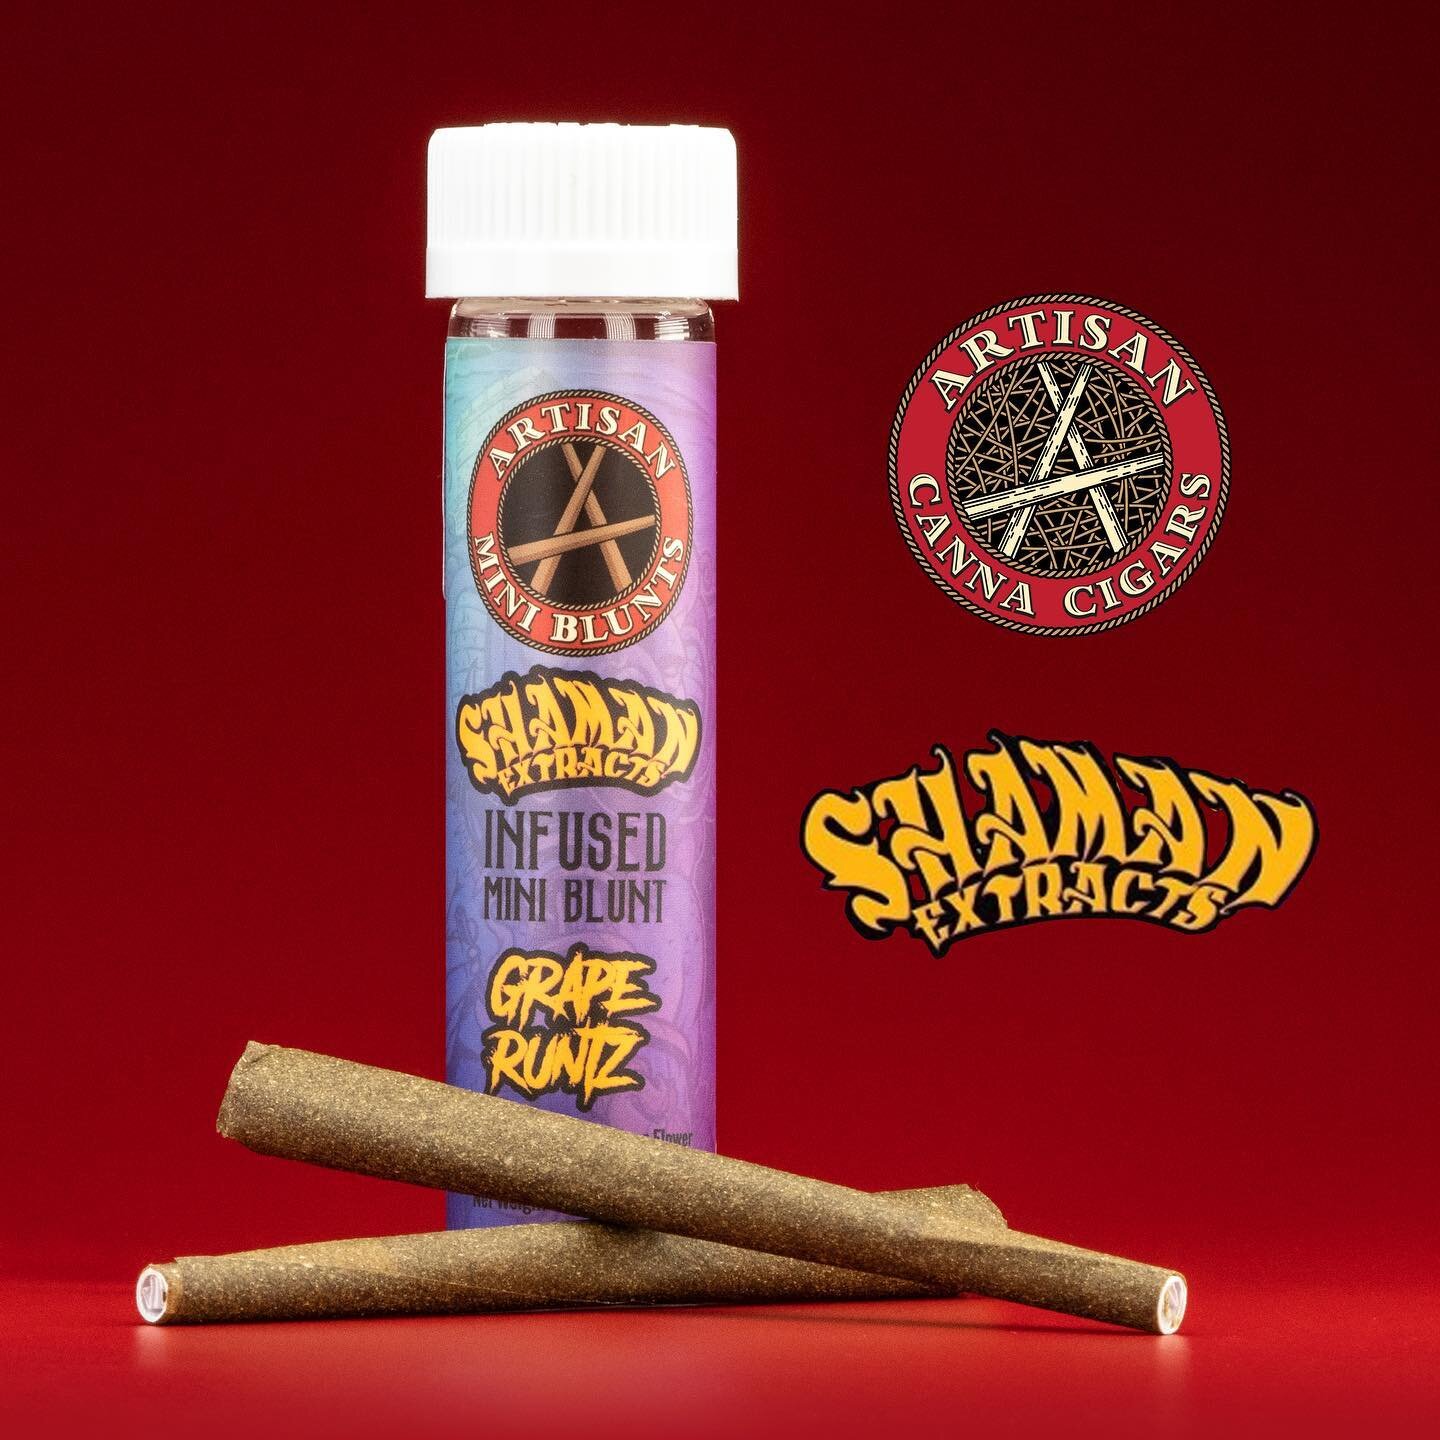 @shamanextracts_ Grape Runtz 2pk Infused Mini Blunts. Monday sure looks good from here!